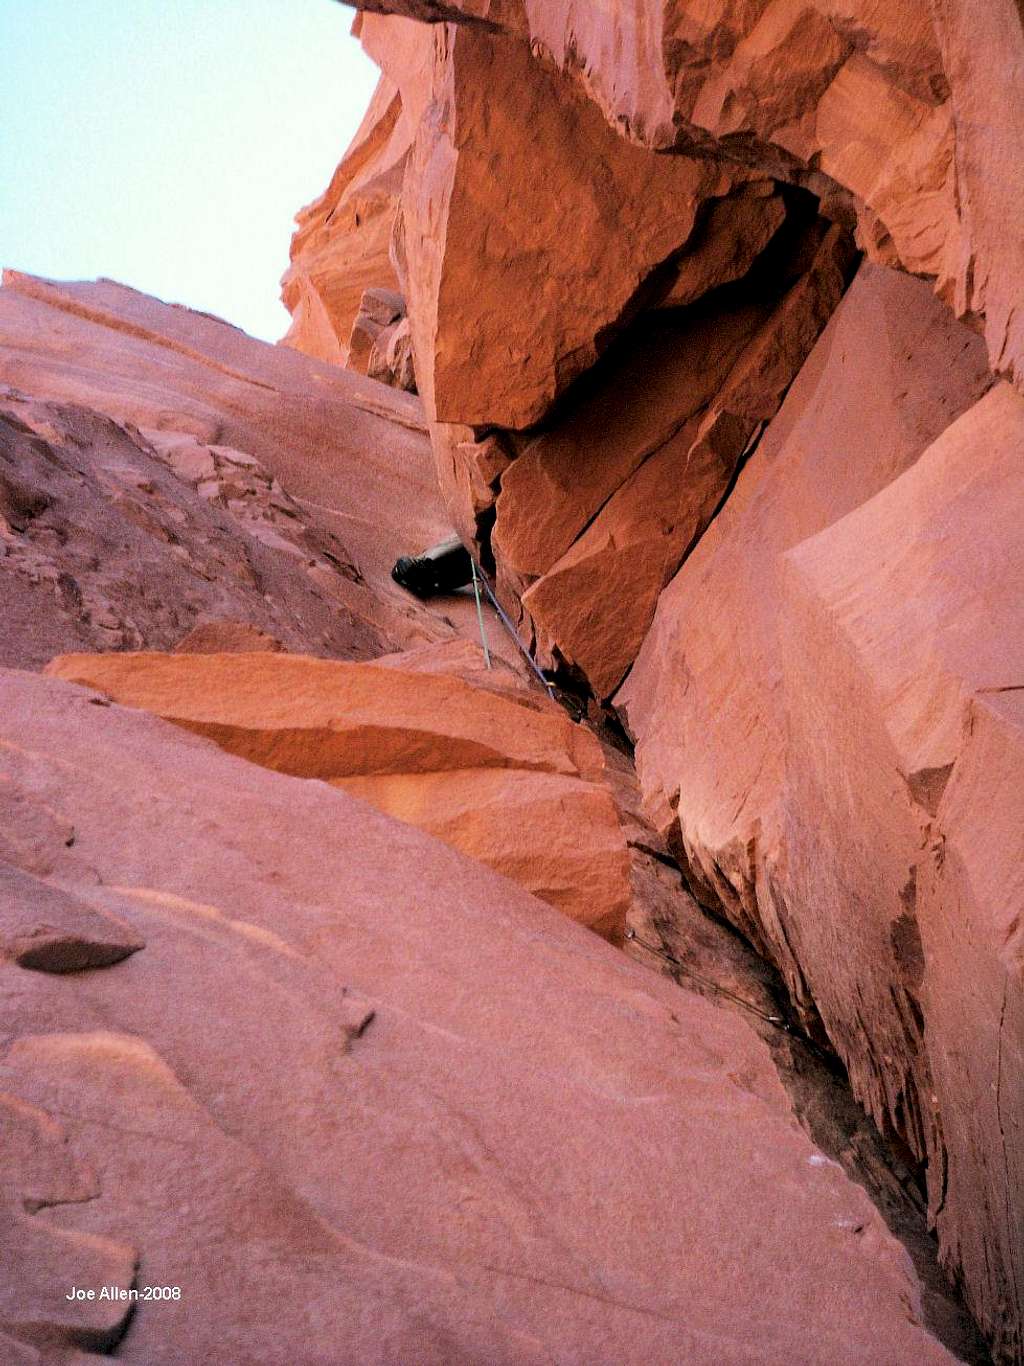 In Search of Suds, 5.10d